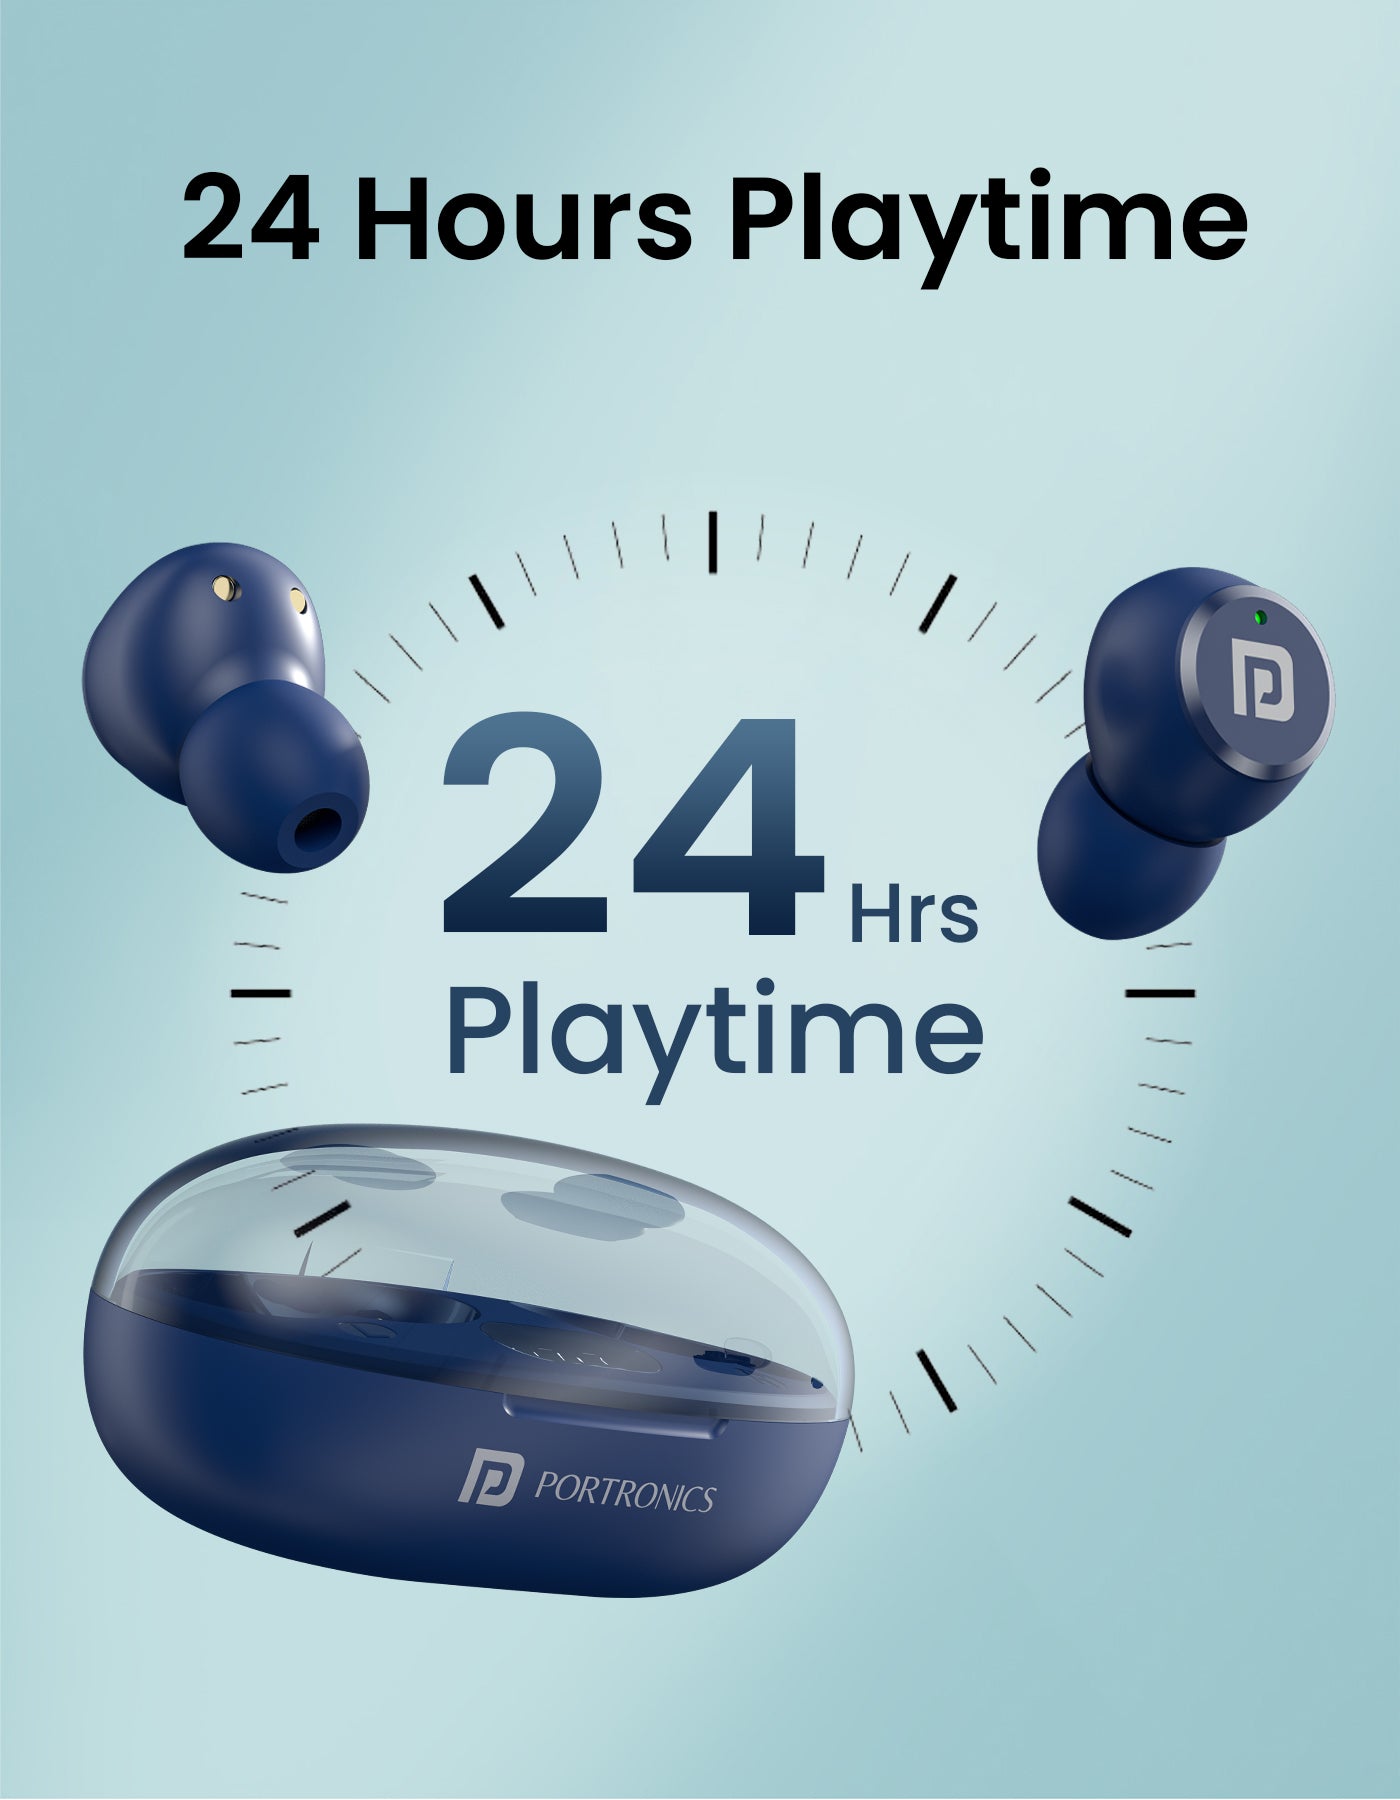 Portronics Harmonics Twins s13  Best earbuds with mini case| Connect quickly to earbuds with latest bluetooth